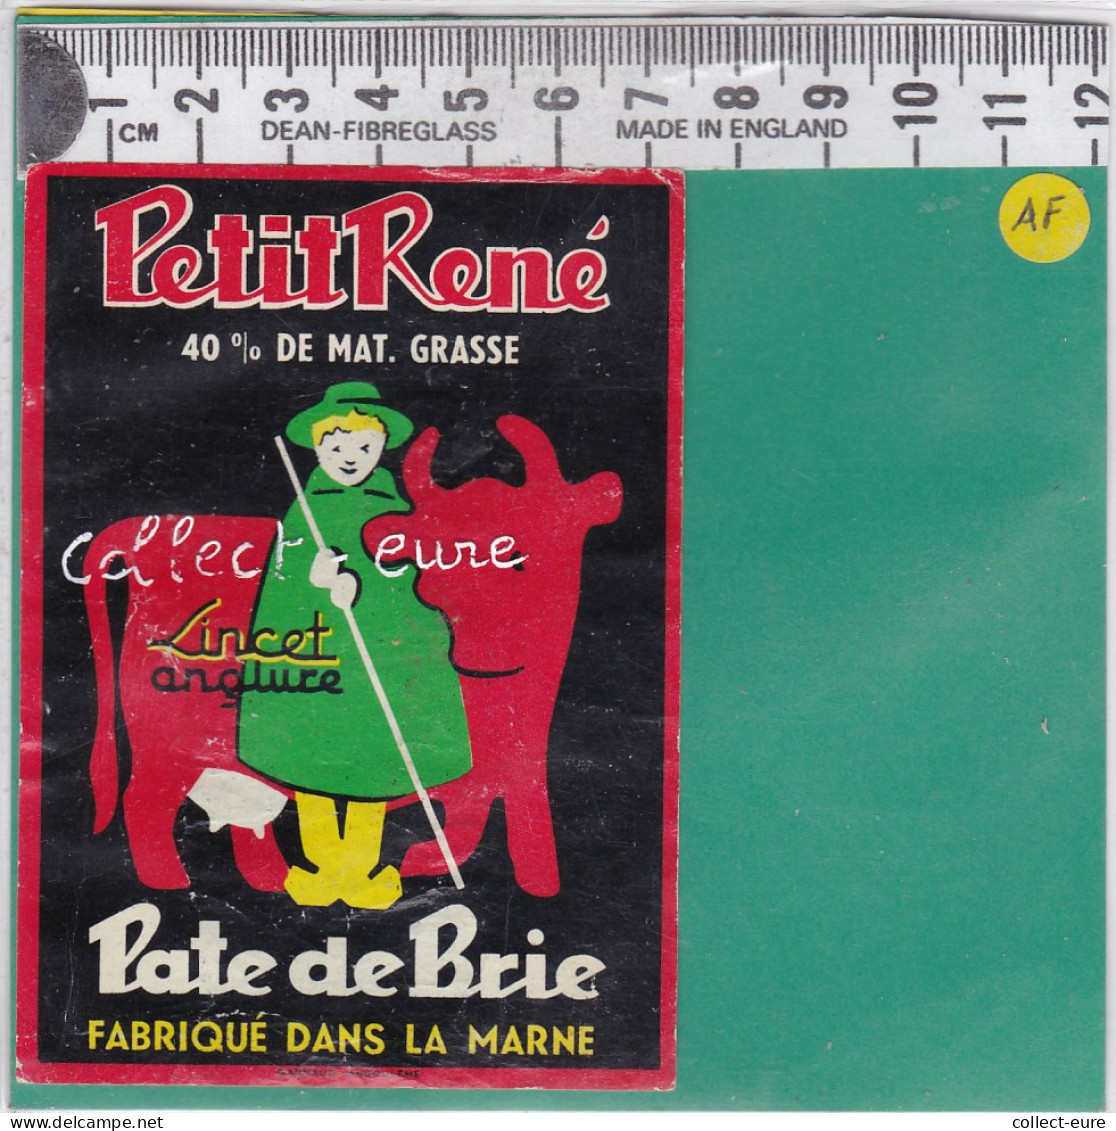 C1219 FROMAGE PATE DE BRIE LINCET ANGLURE  MARNE 40 % LE PETIT RENE - Fromage